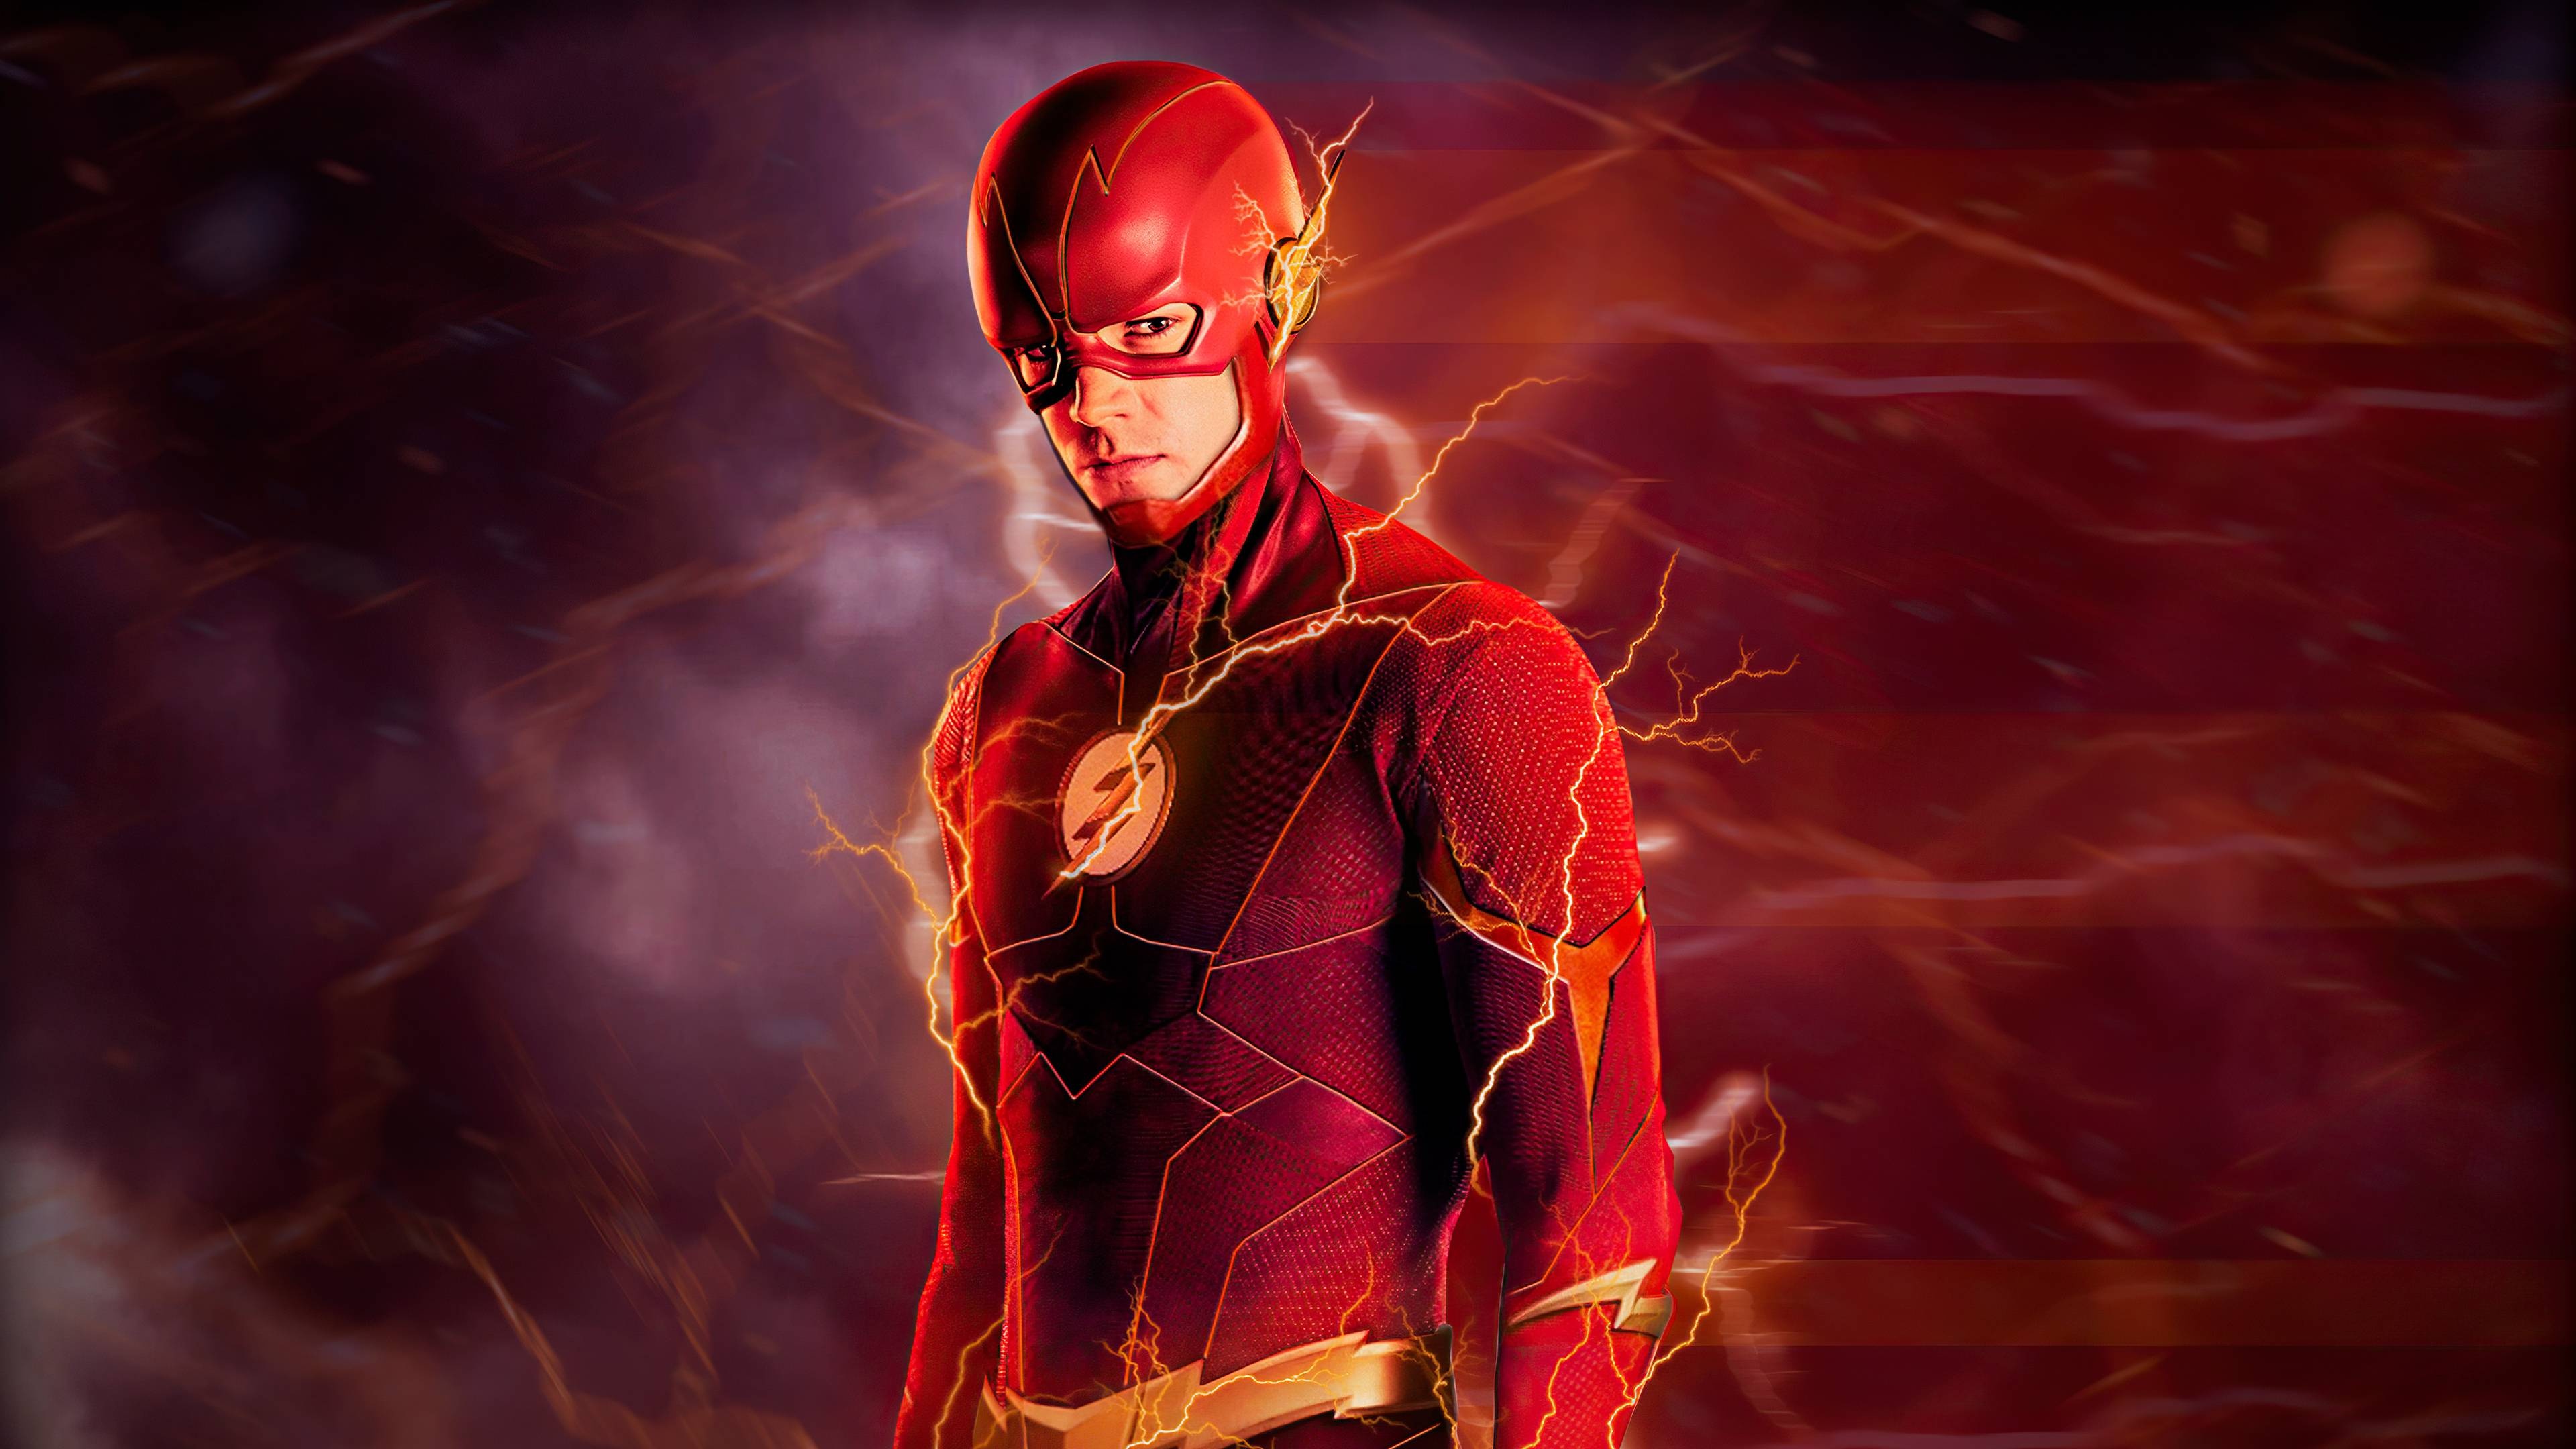 Flash (TV Series): Barry Allen gains super-human speed after the explosion of the S.T.A.R. Labs' particle accelerator. 3840x2160 4K Wallpaper.